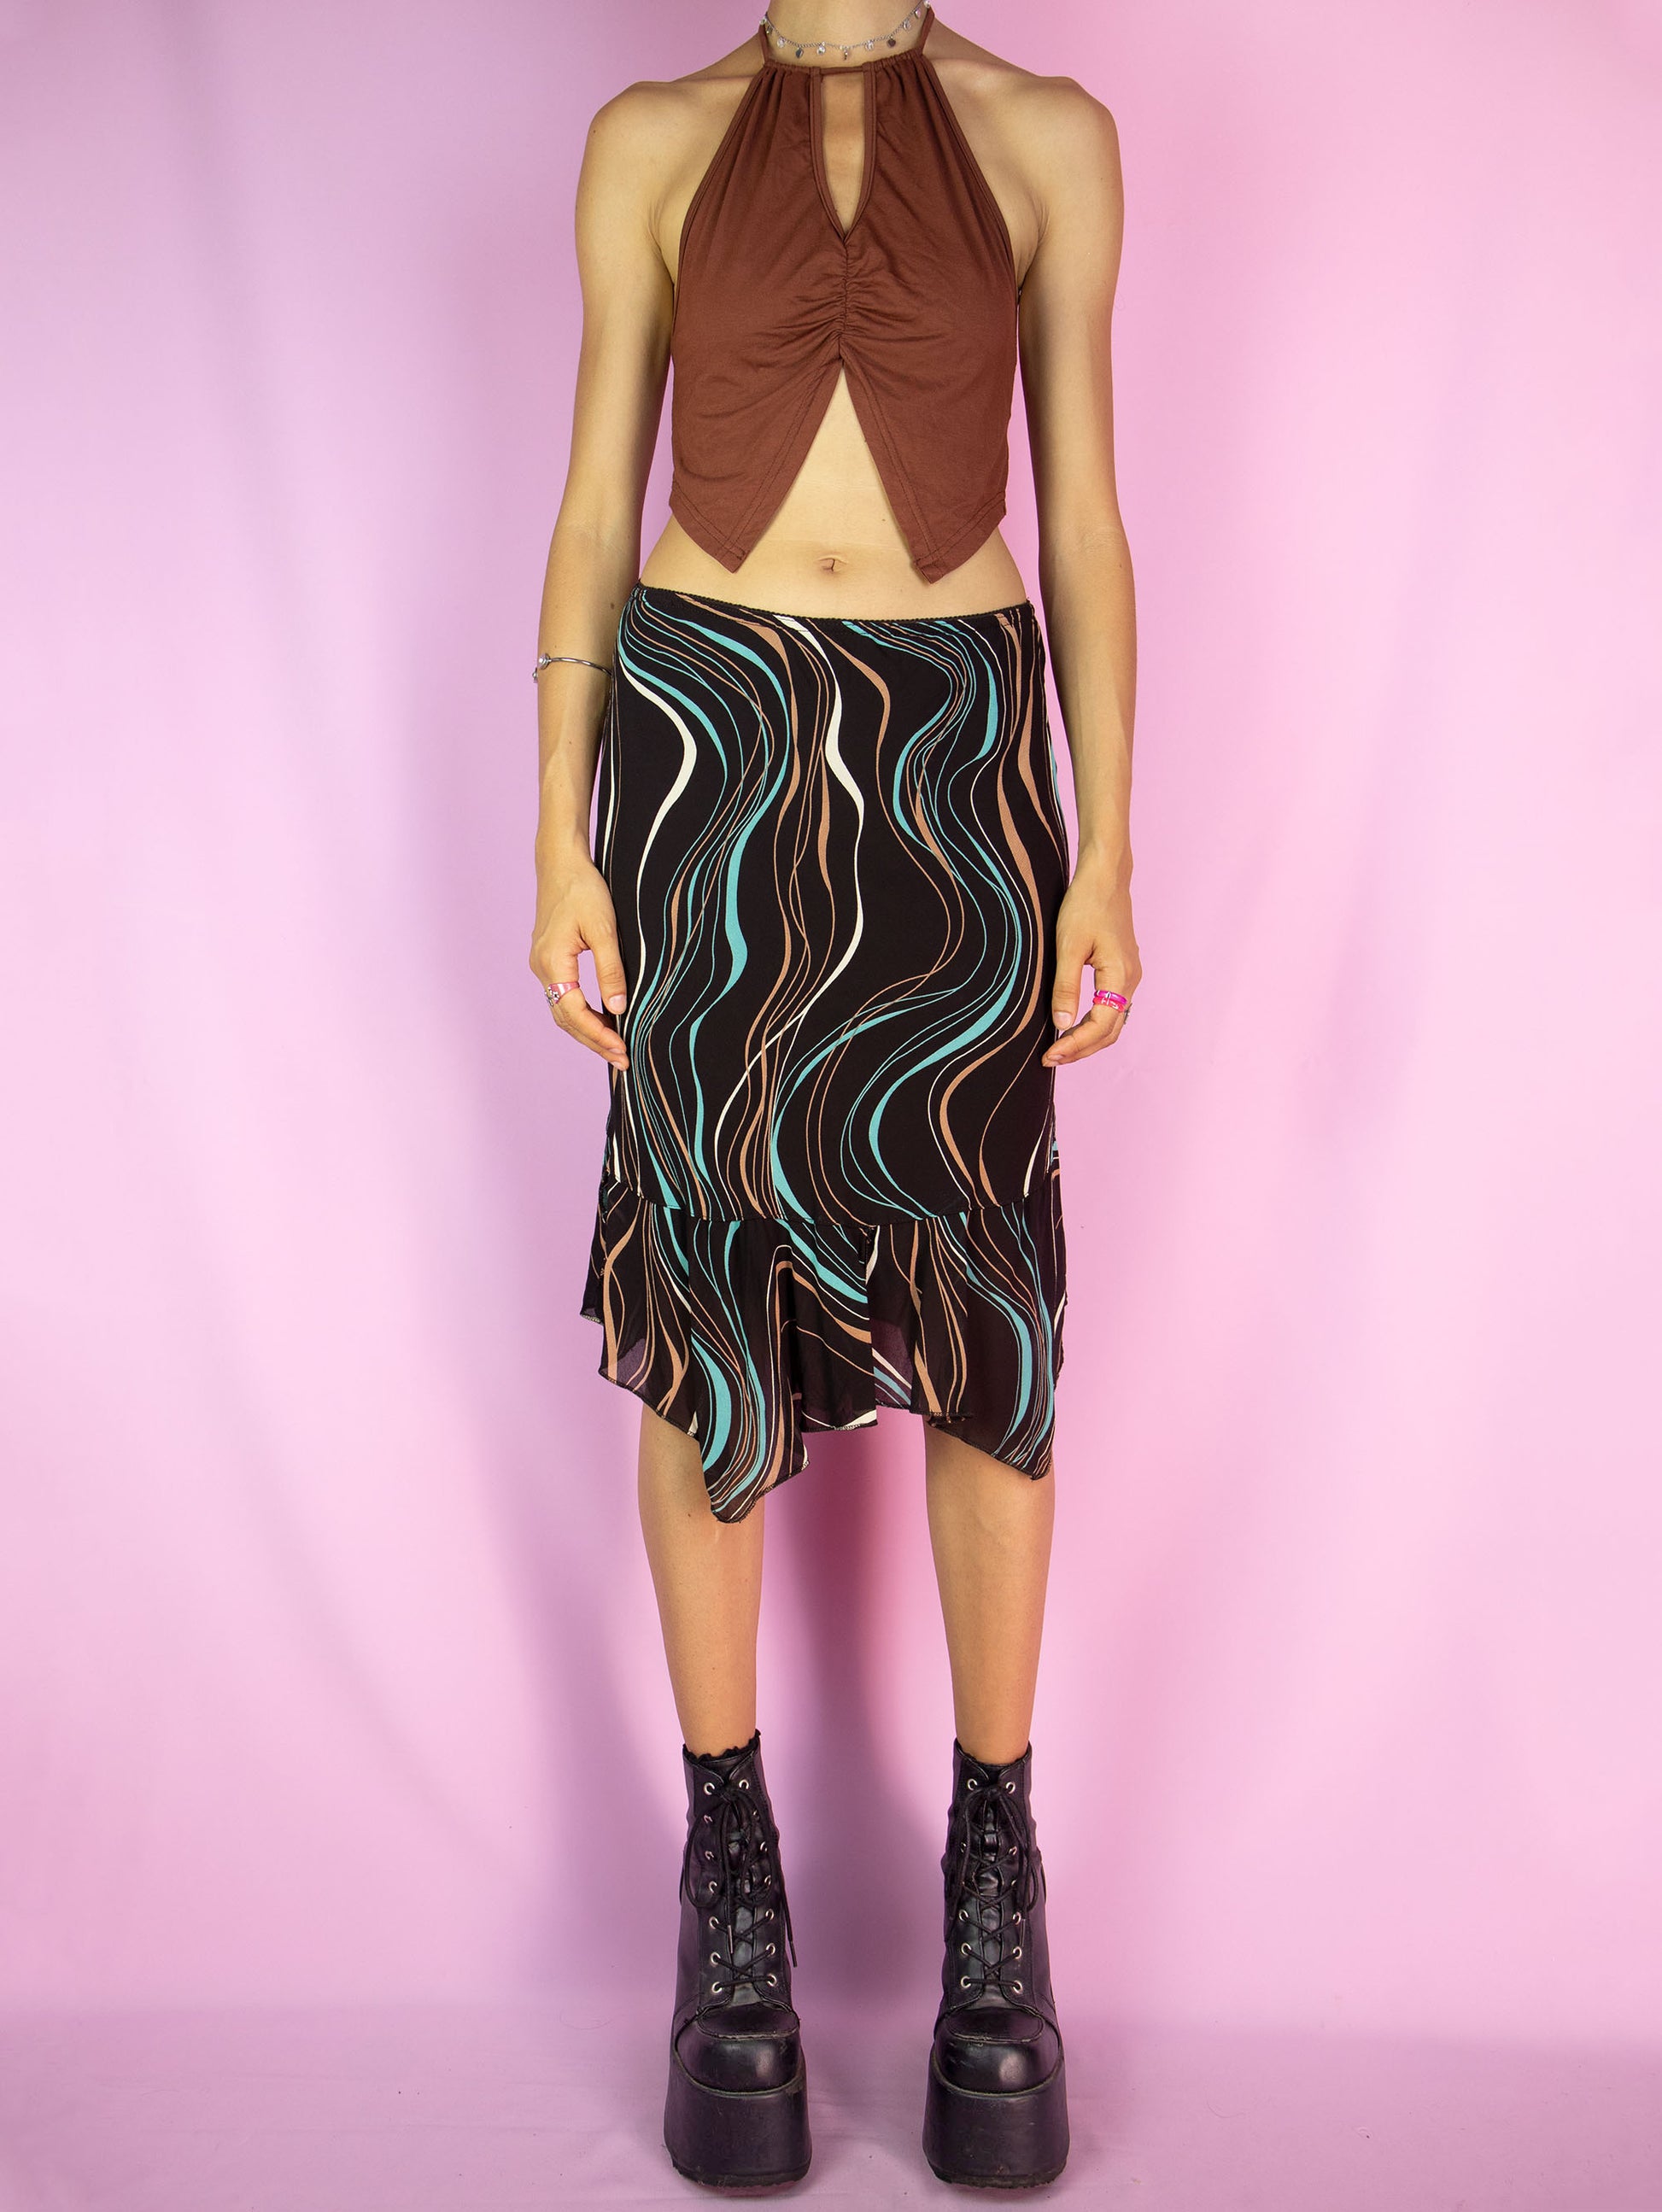 The Y2K Brown Handkerchief Mini Skirt is a vintage abstract striped printed skirt with an elasticated waist, and an asymmetrical pointed hem. Cyber fairy grunge 2000s boho summer midi skirt.